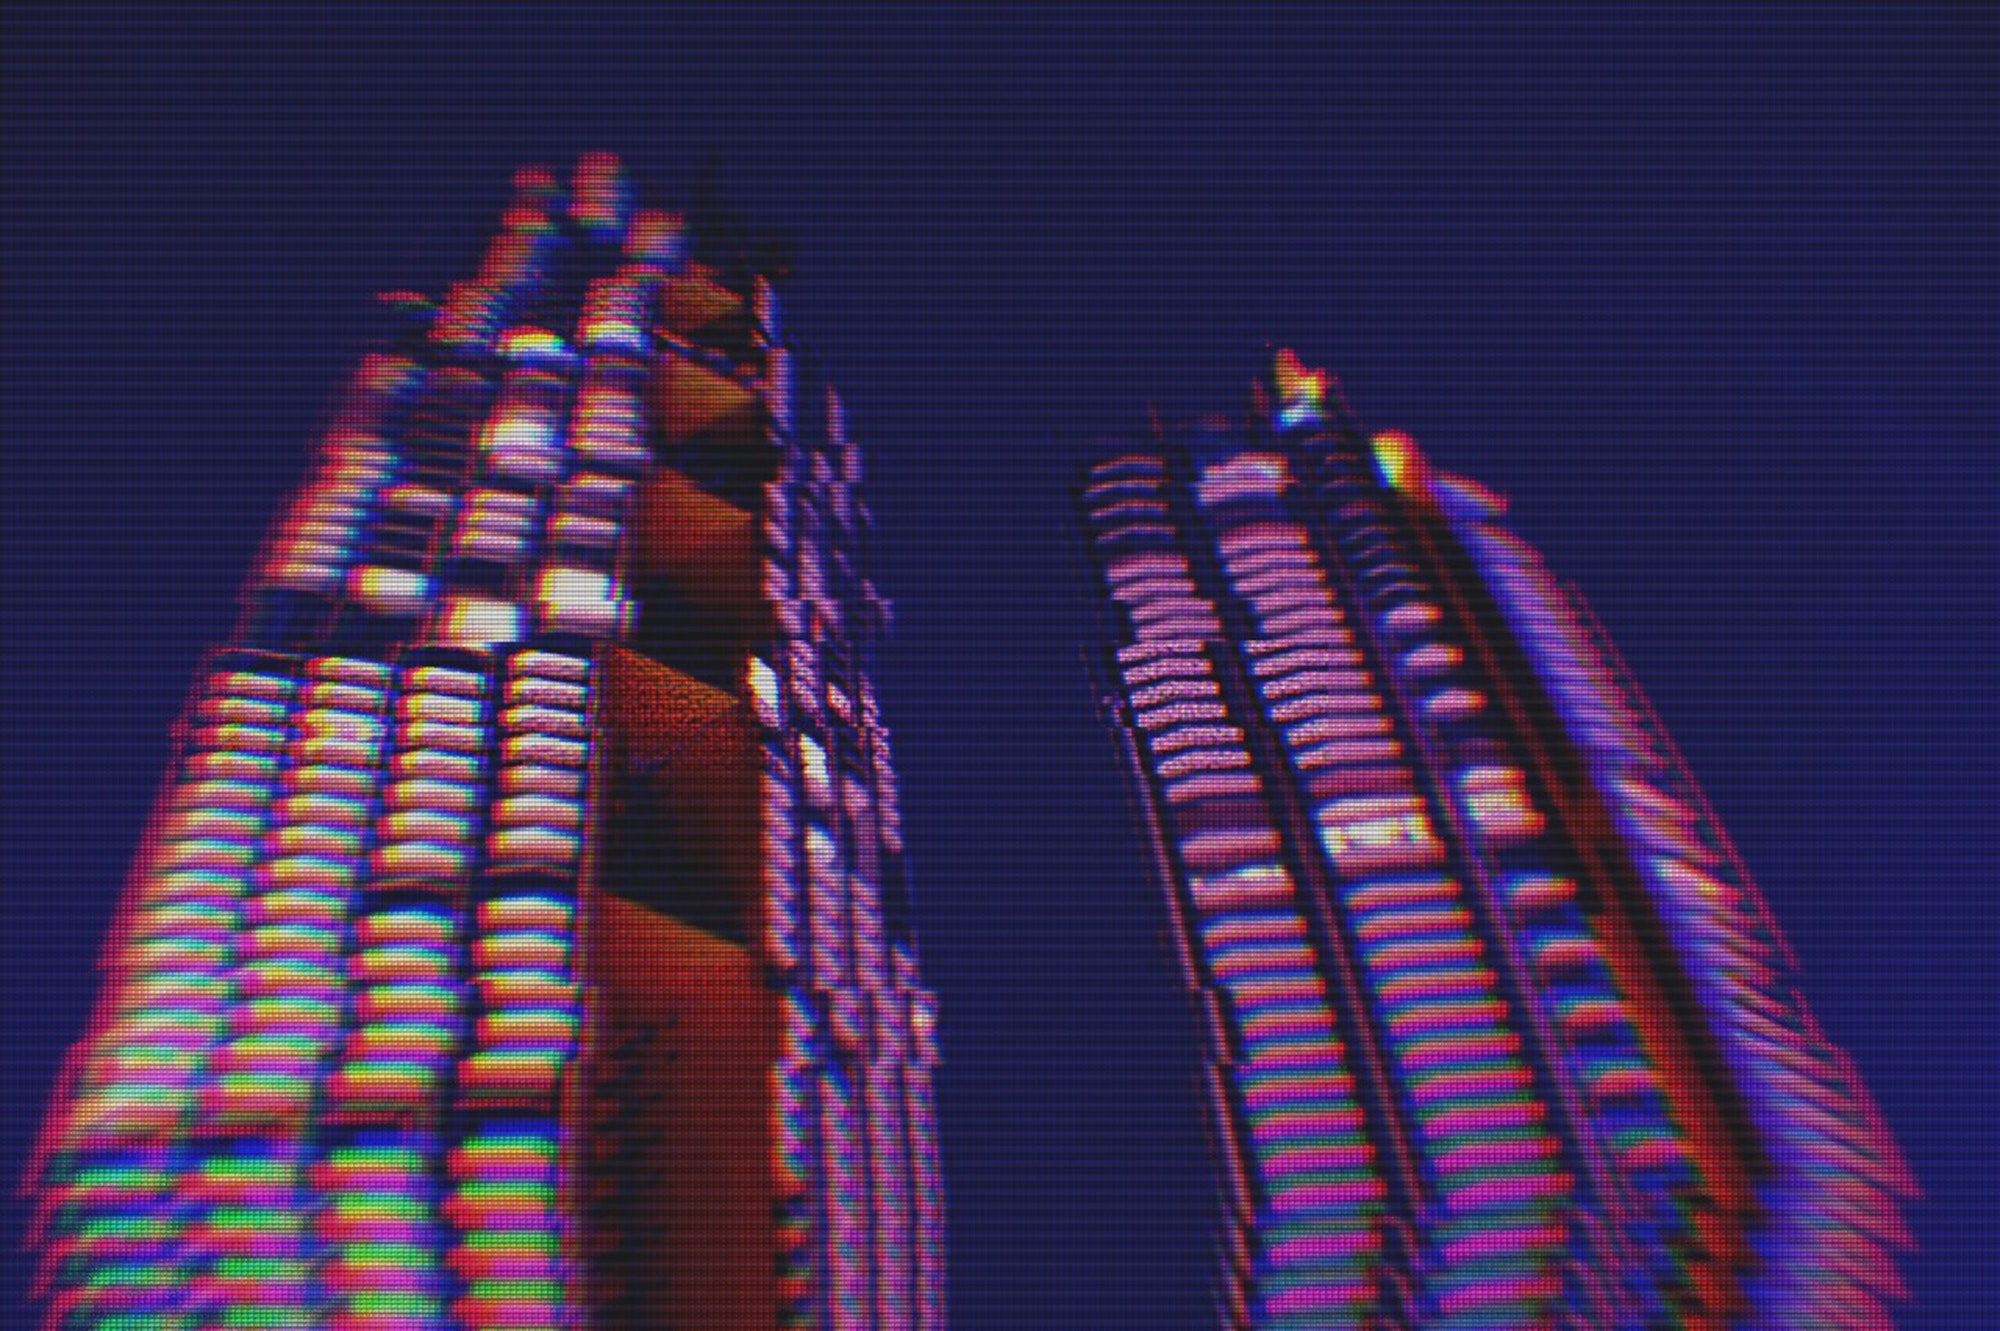 Modern buildings in the city night background with digital glitch effect